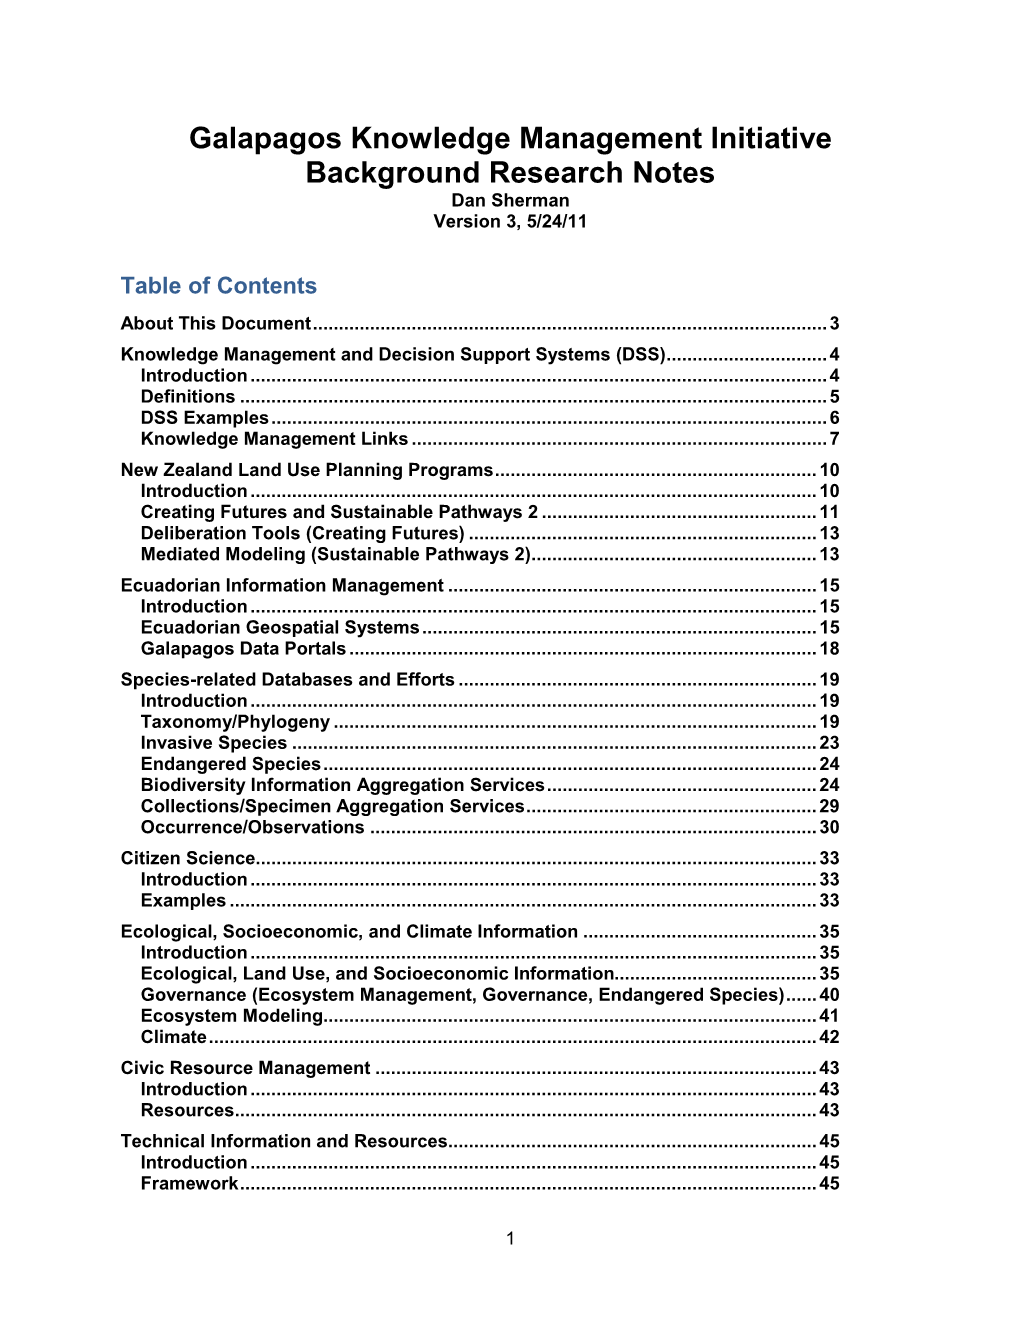 Galapagos Knowledge Management Initiative Background Notes